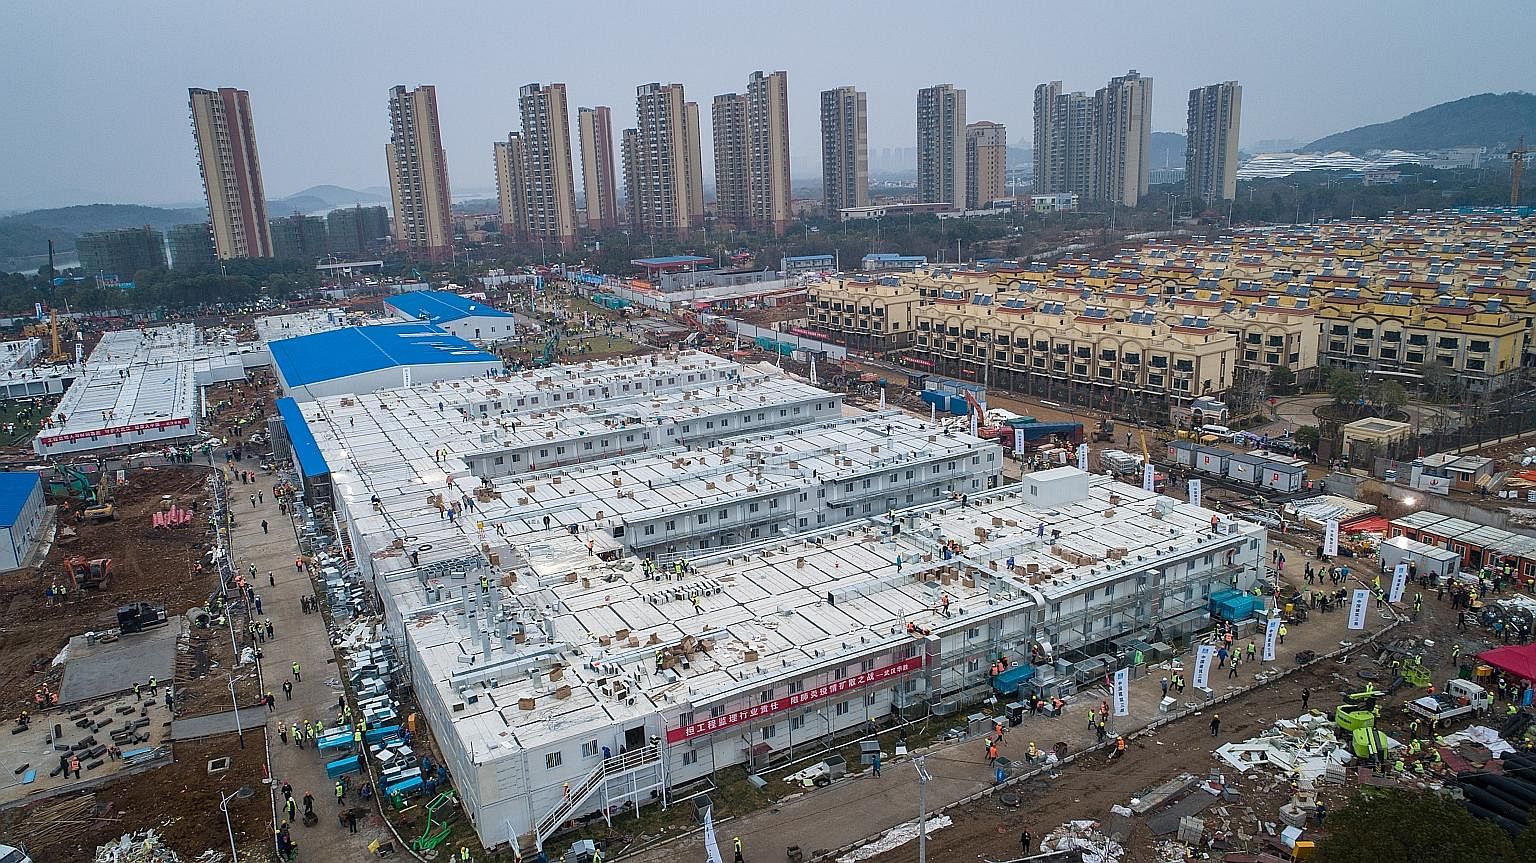 INSTANT HOSPITAL: Built in just 10 days, a dedicated hospital to treat coronavirus patients in Wuhan, the epicentre of the outbreak in central China's Hubei province, received its first patients yesterday, state media said. Construction of the hospit